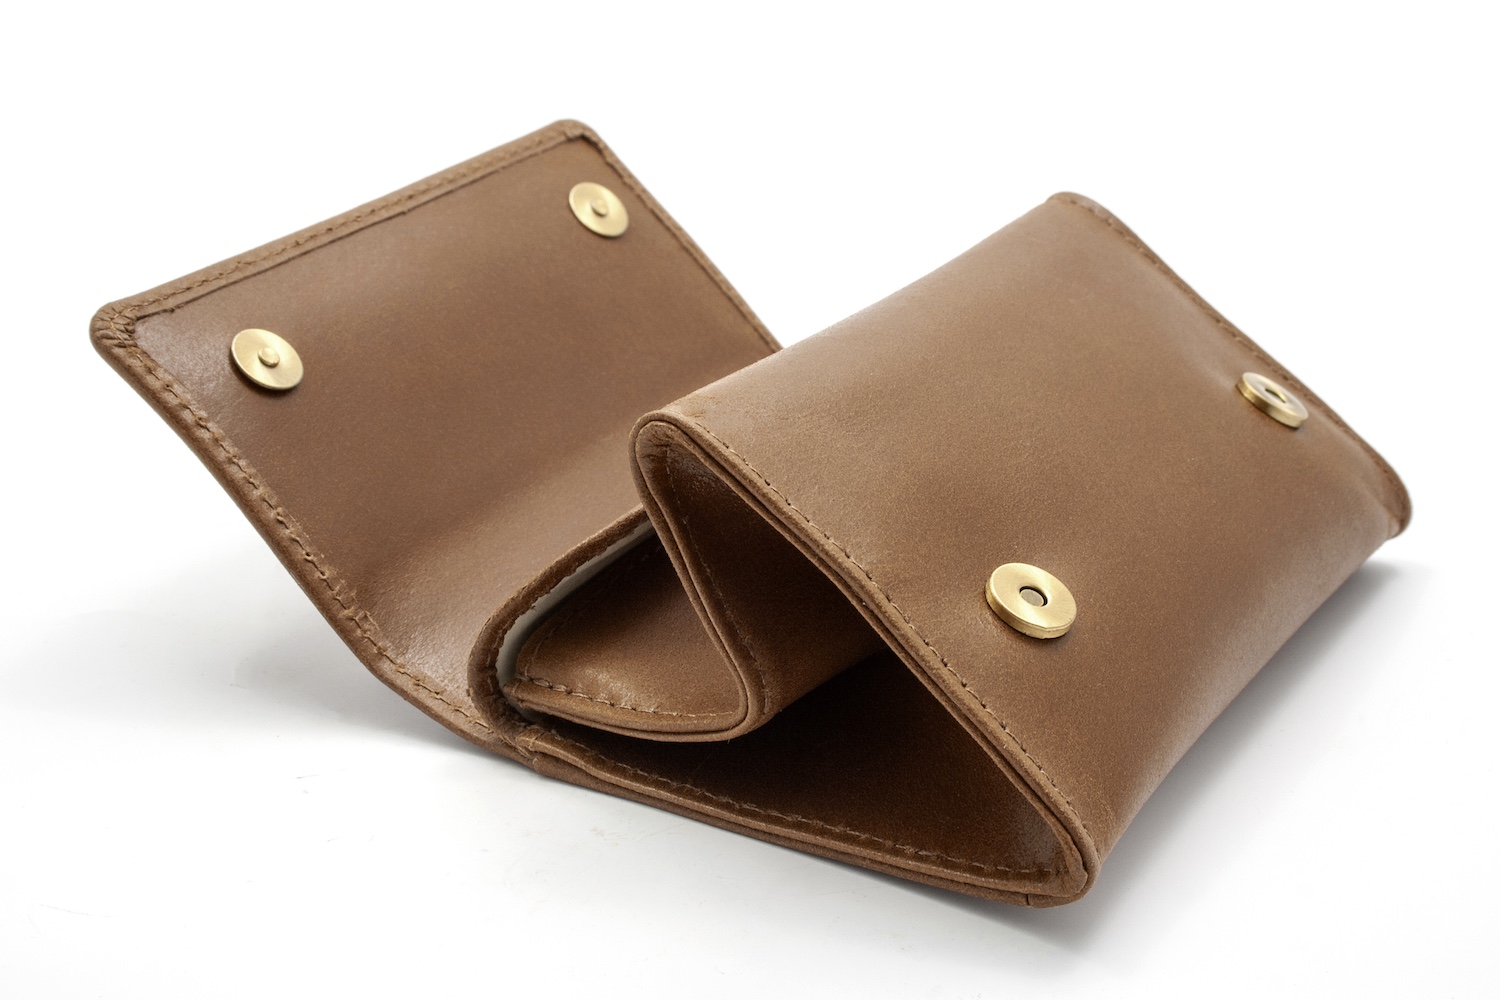 Rattray's Whisky Tobacco Pouch 2 - Small Stand up